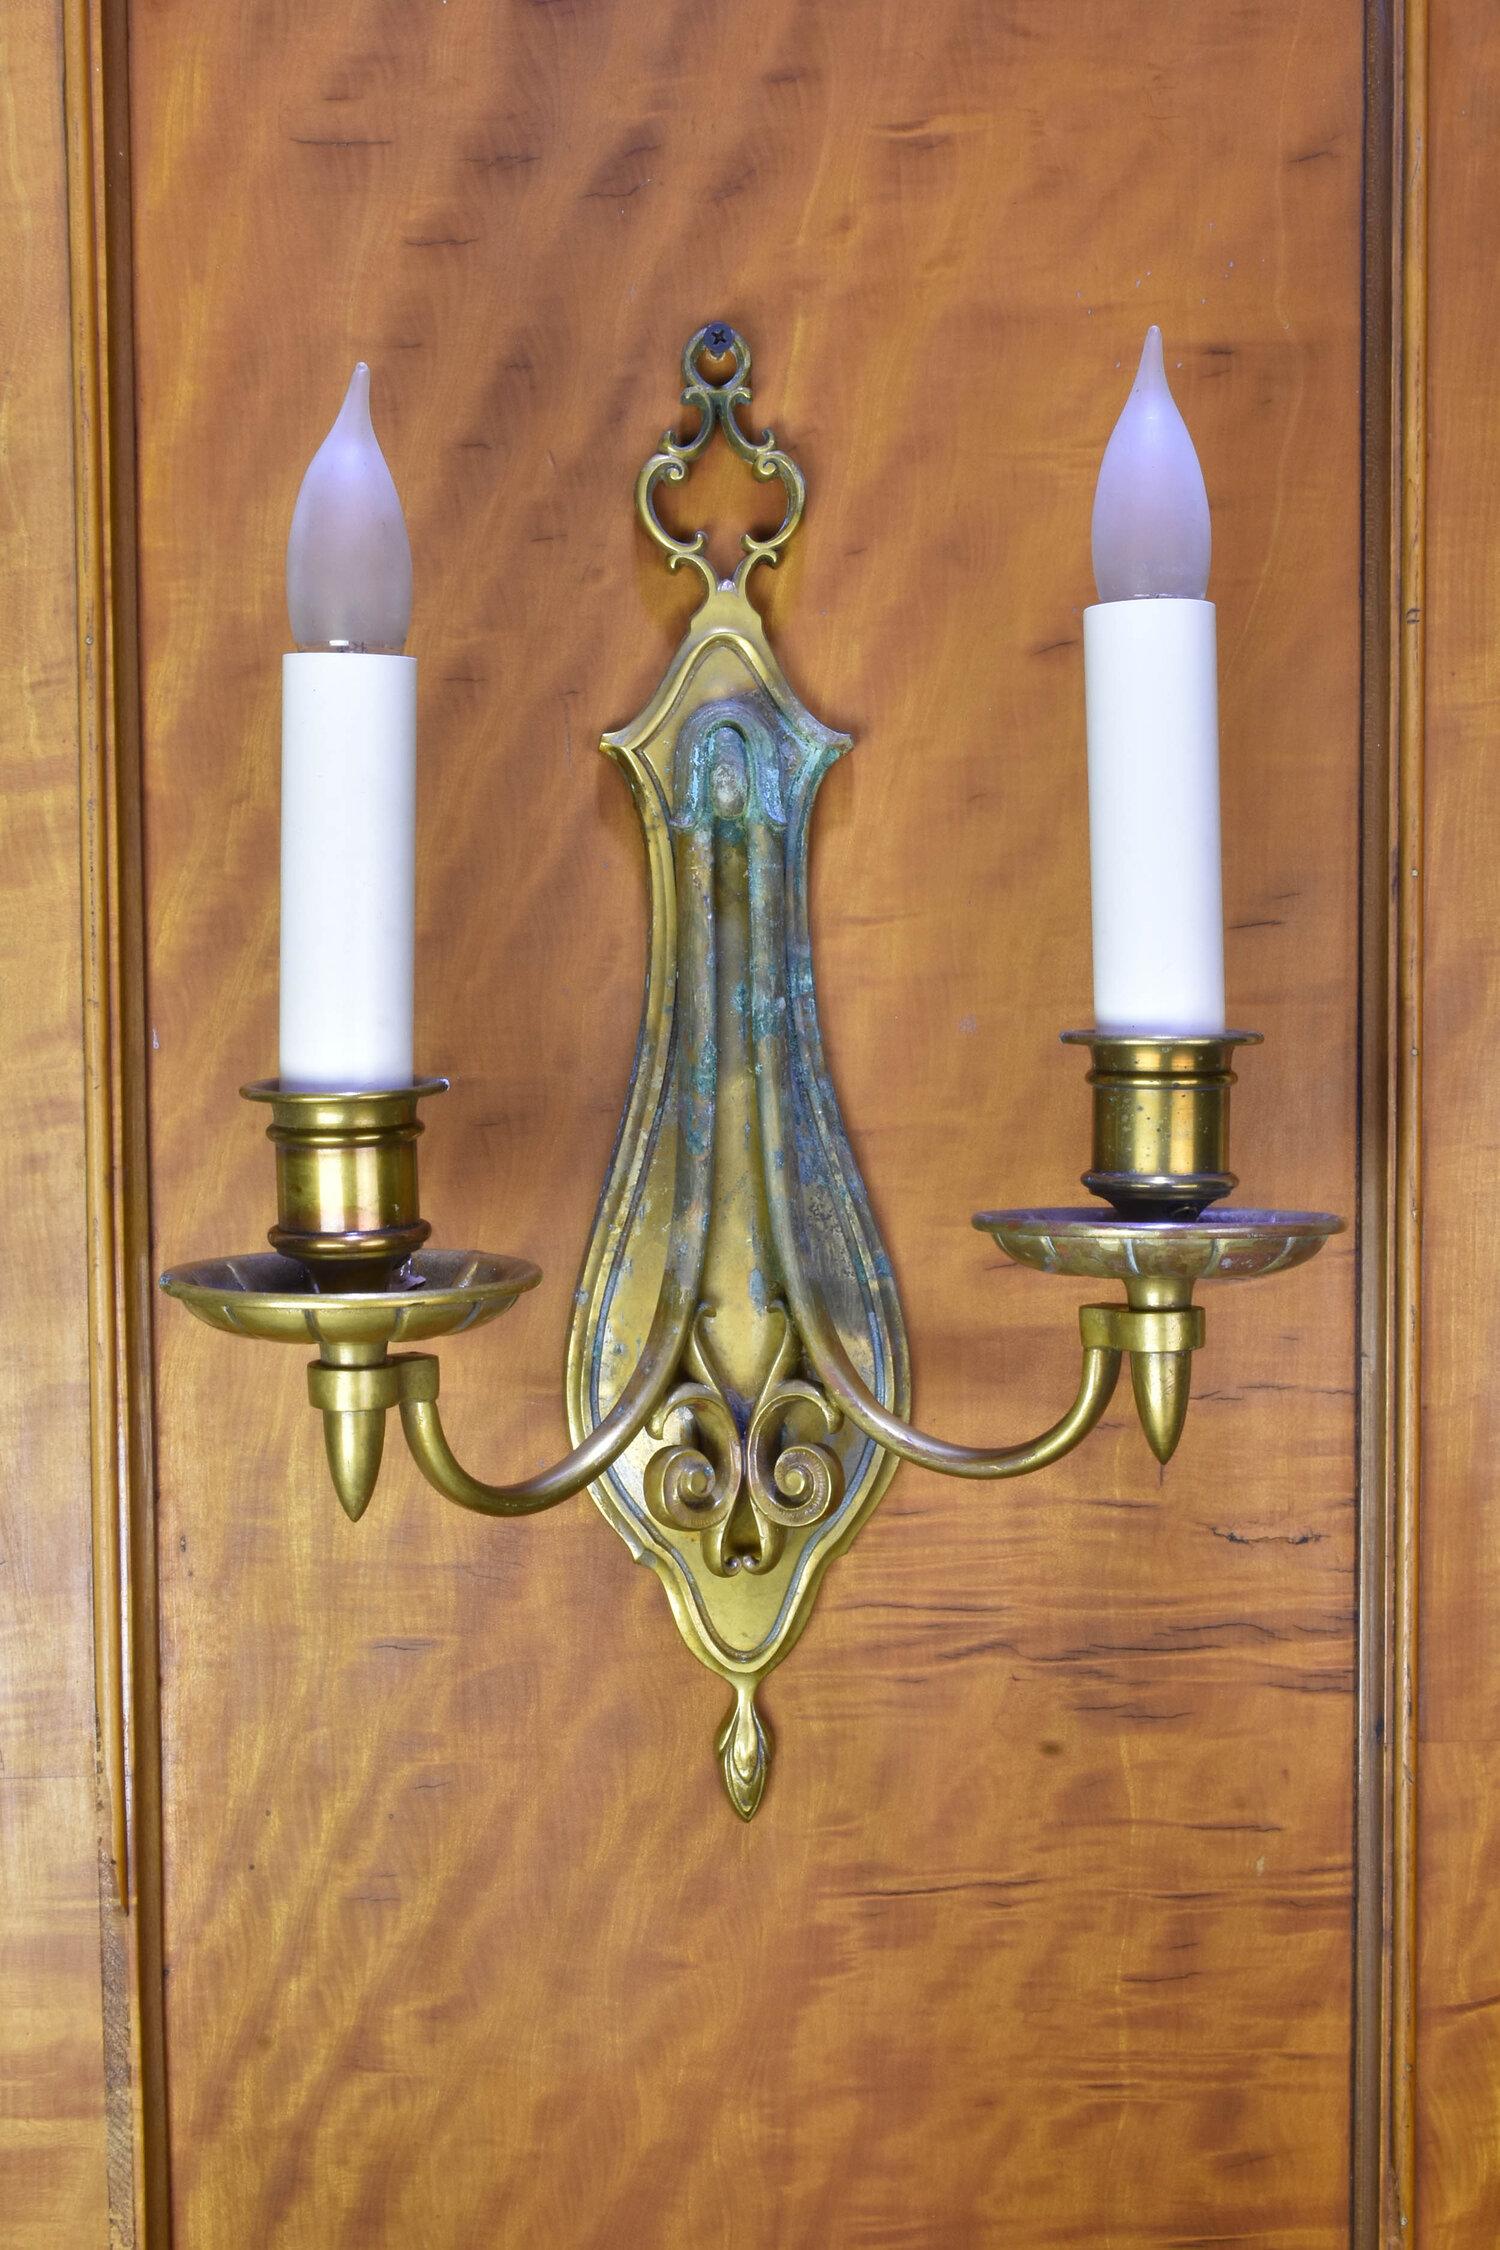 These bronze/brass sconces circa 1900s are by Bradley & Hubbard, a company known for their quality of craftsmanship. Although Nathaniel Bradley, William Bradley, and Walter Hubbard started their Connecticut-based company in 1852, they did not begin